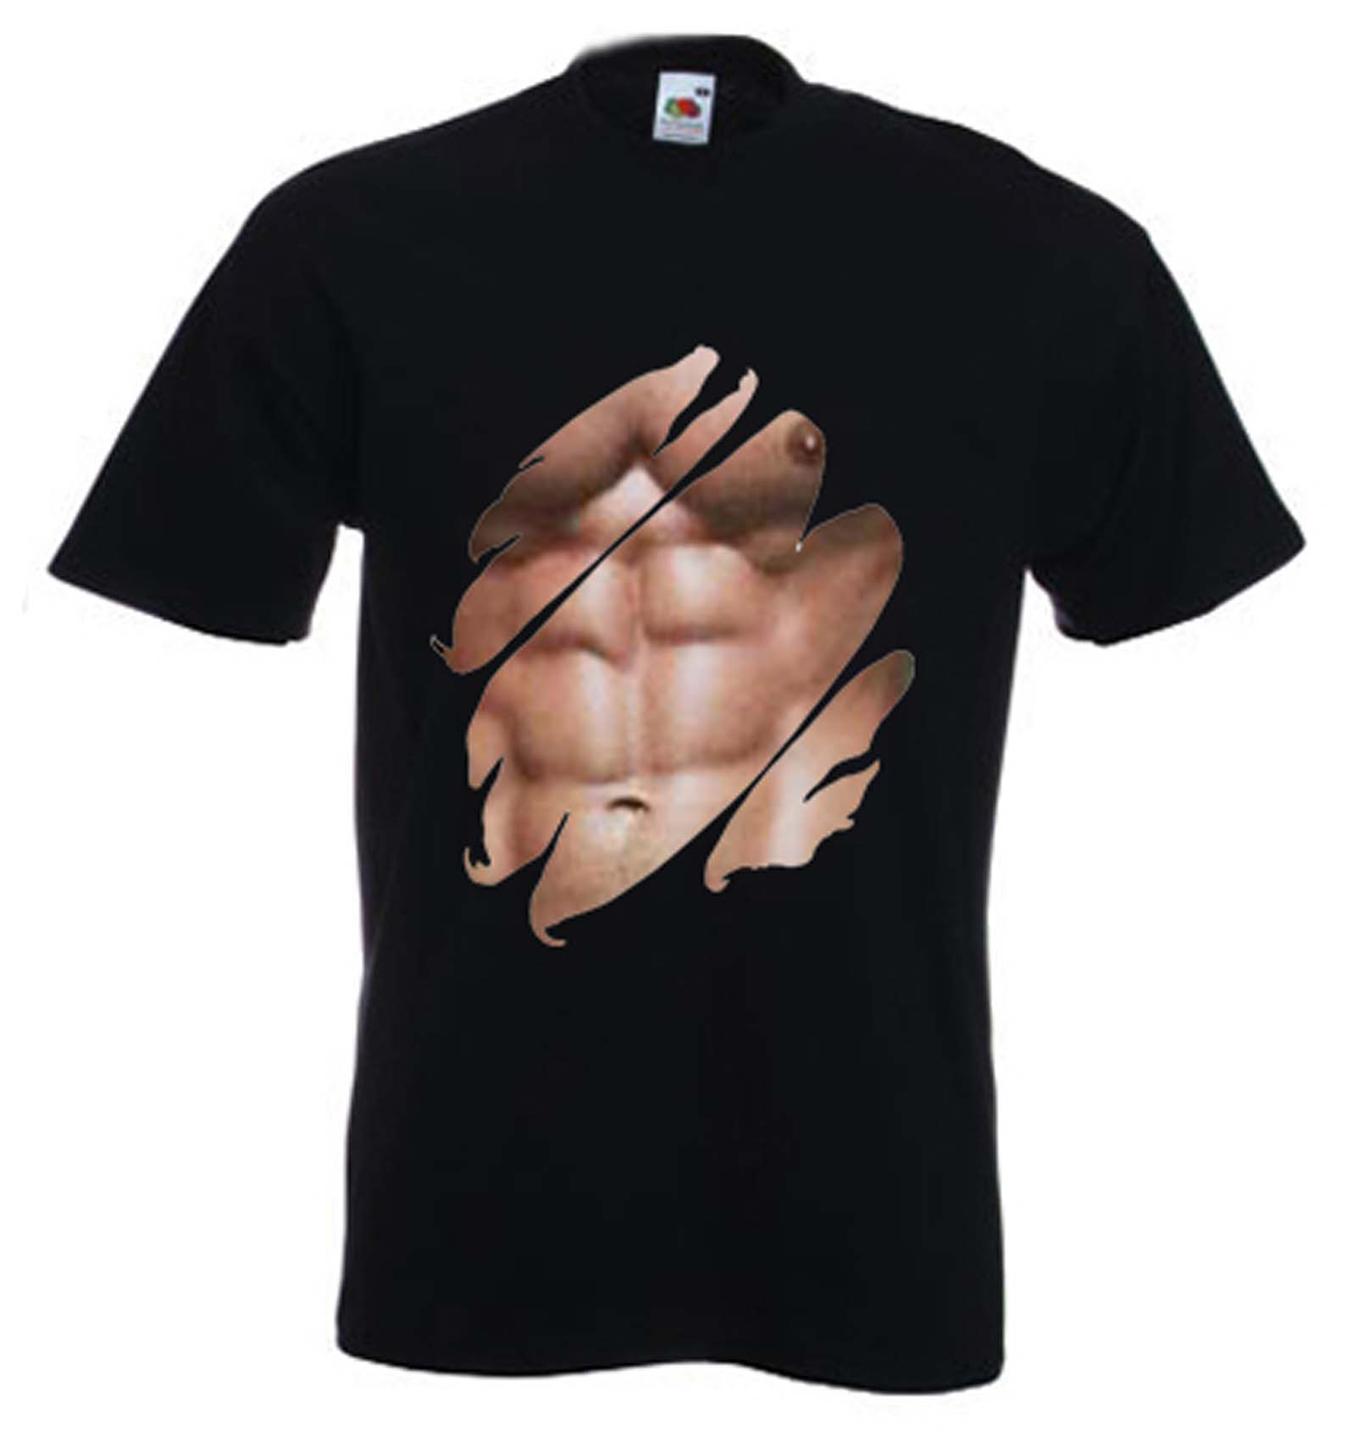 SIX PACK MUSCLE T-SHIRT - Fancy Dress Stag Party 6 Abs Muscles - Size S ...